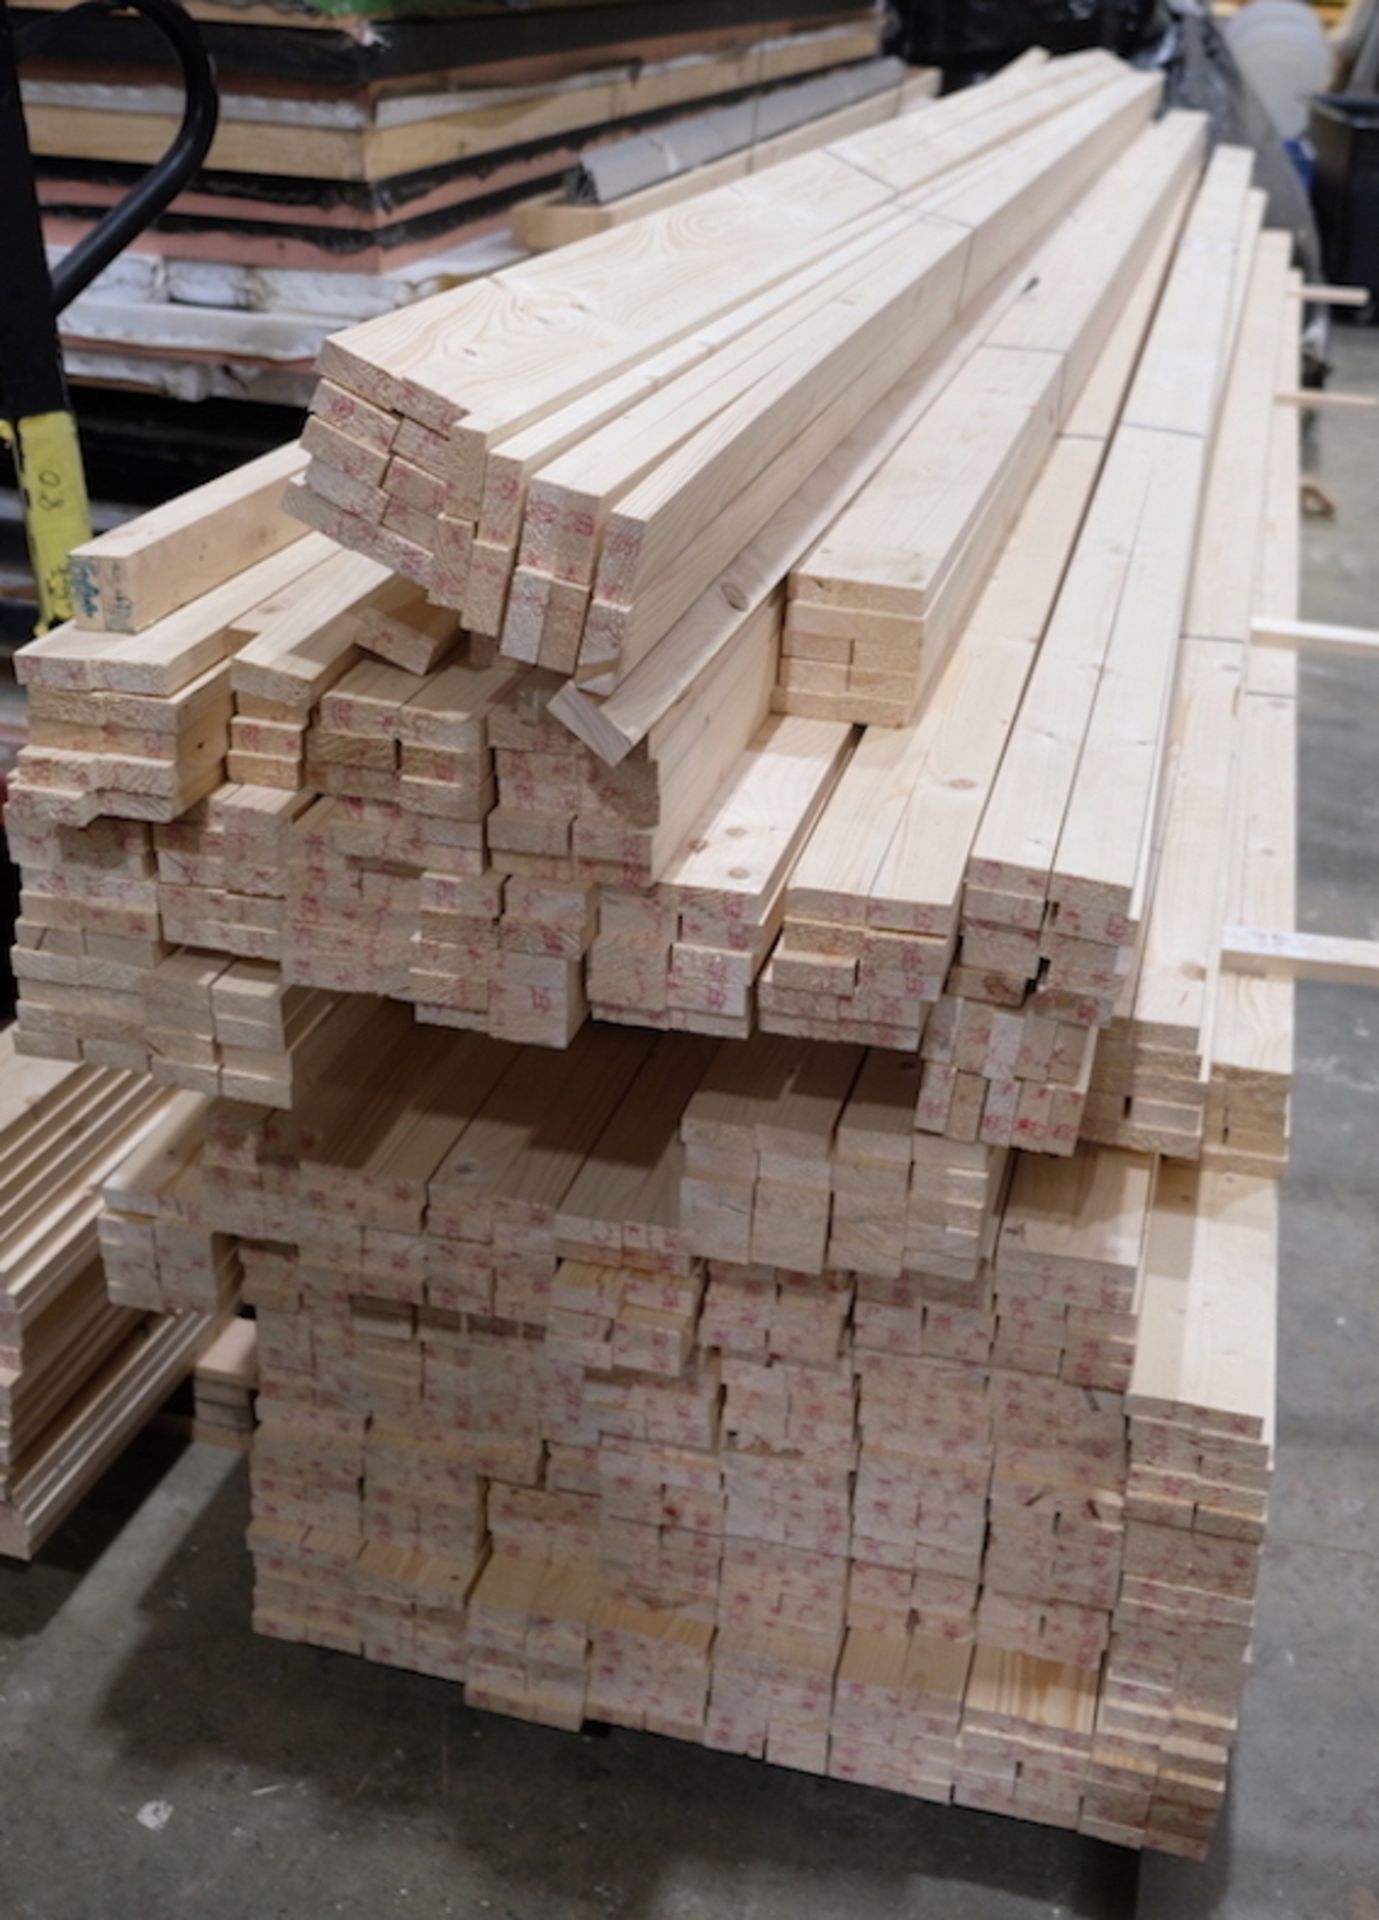 Approximately 500 Lengths of Softwood. 450cm x 4.5cm x 2.5cm (Requires Manual Loading) (Located